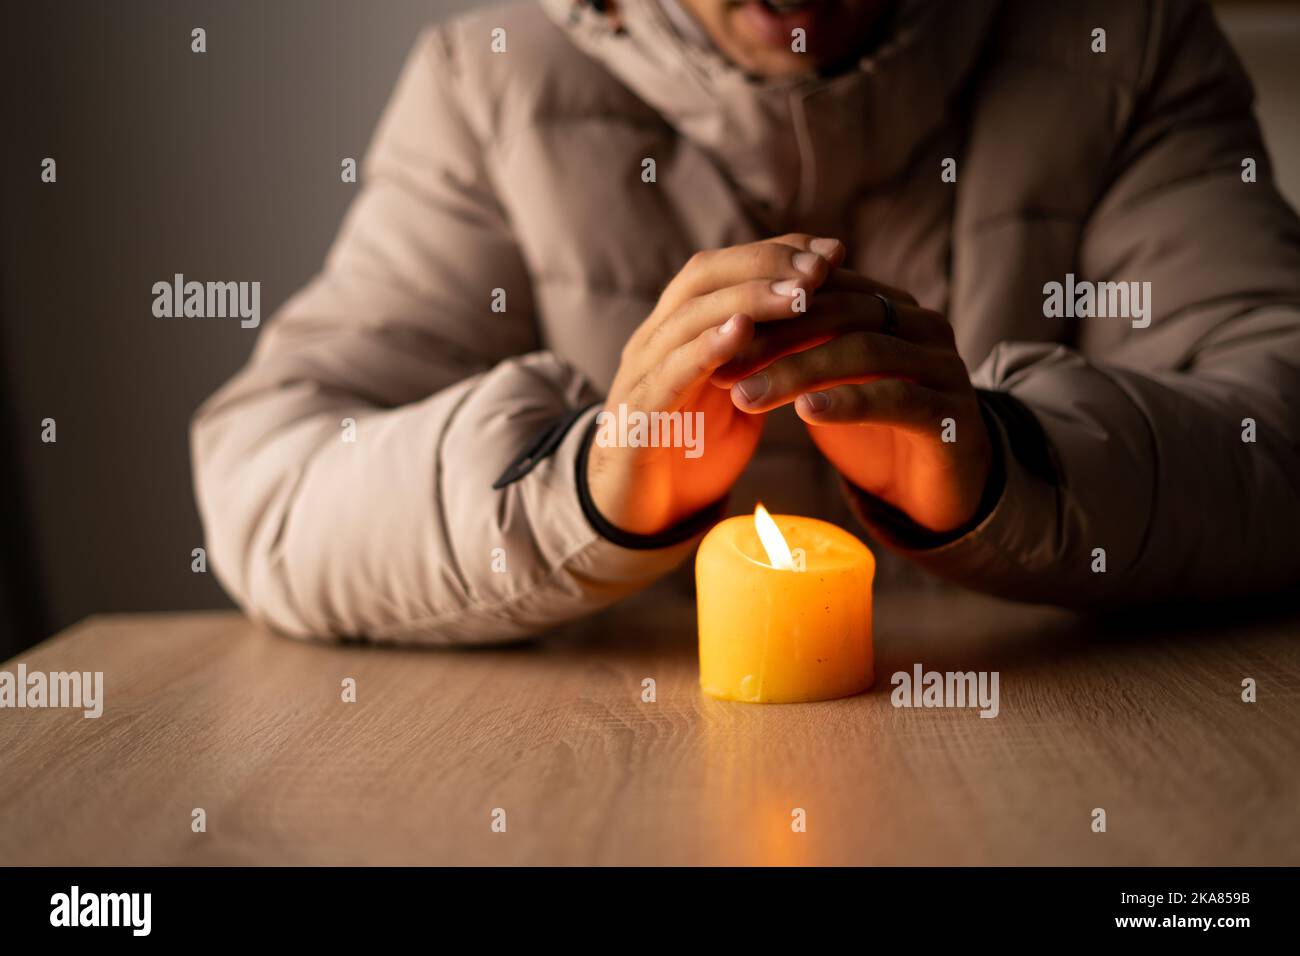 https://c8.alamy.com/comp/2KA859B/a-man-warms-his-hands-from-a-burning-candle-at-cold-house-close-up-shutdown-of-heating-and-electricity-power-outage-blackout-energy-crisis-2KA859B.jpg